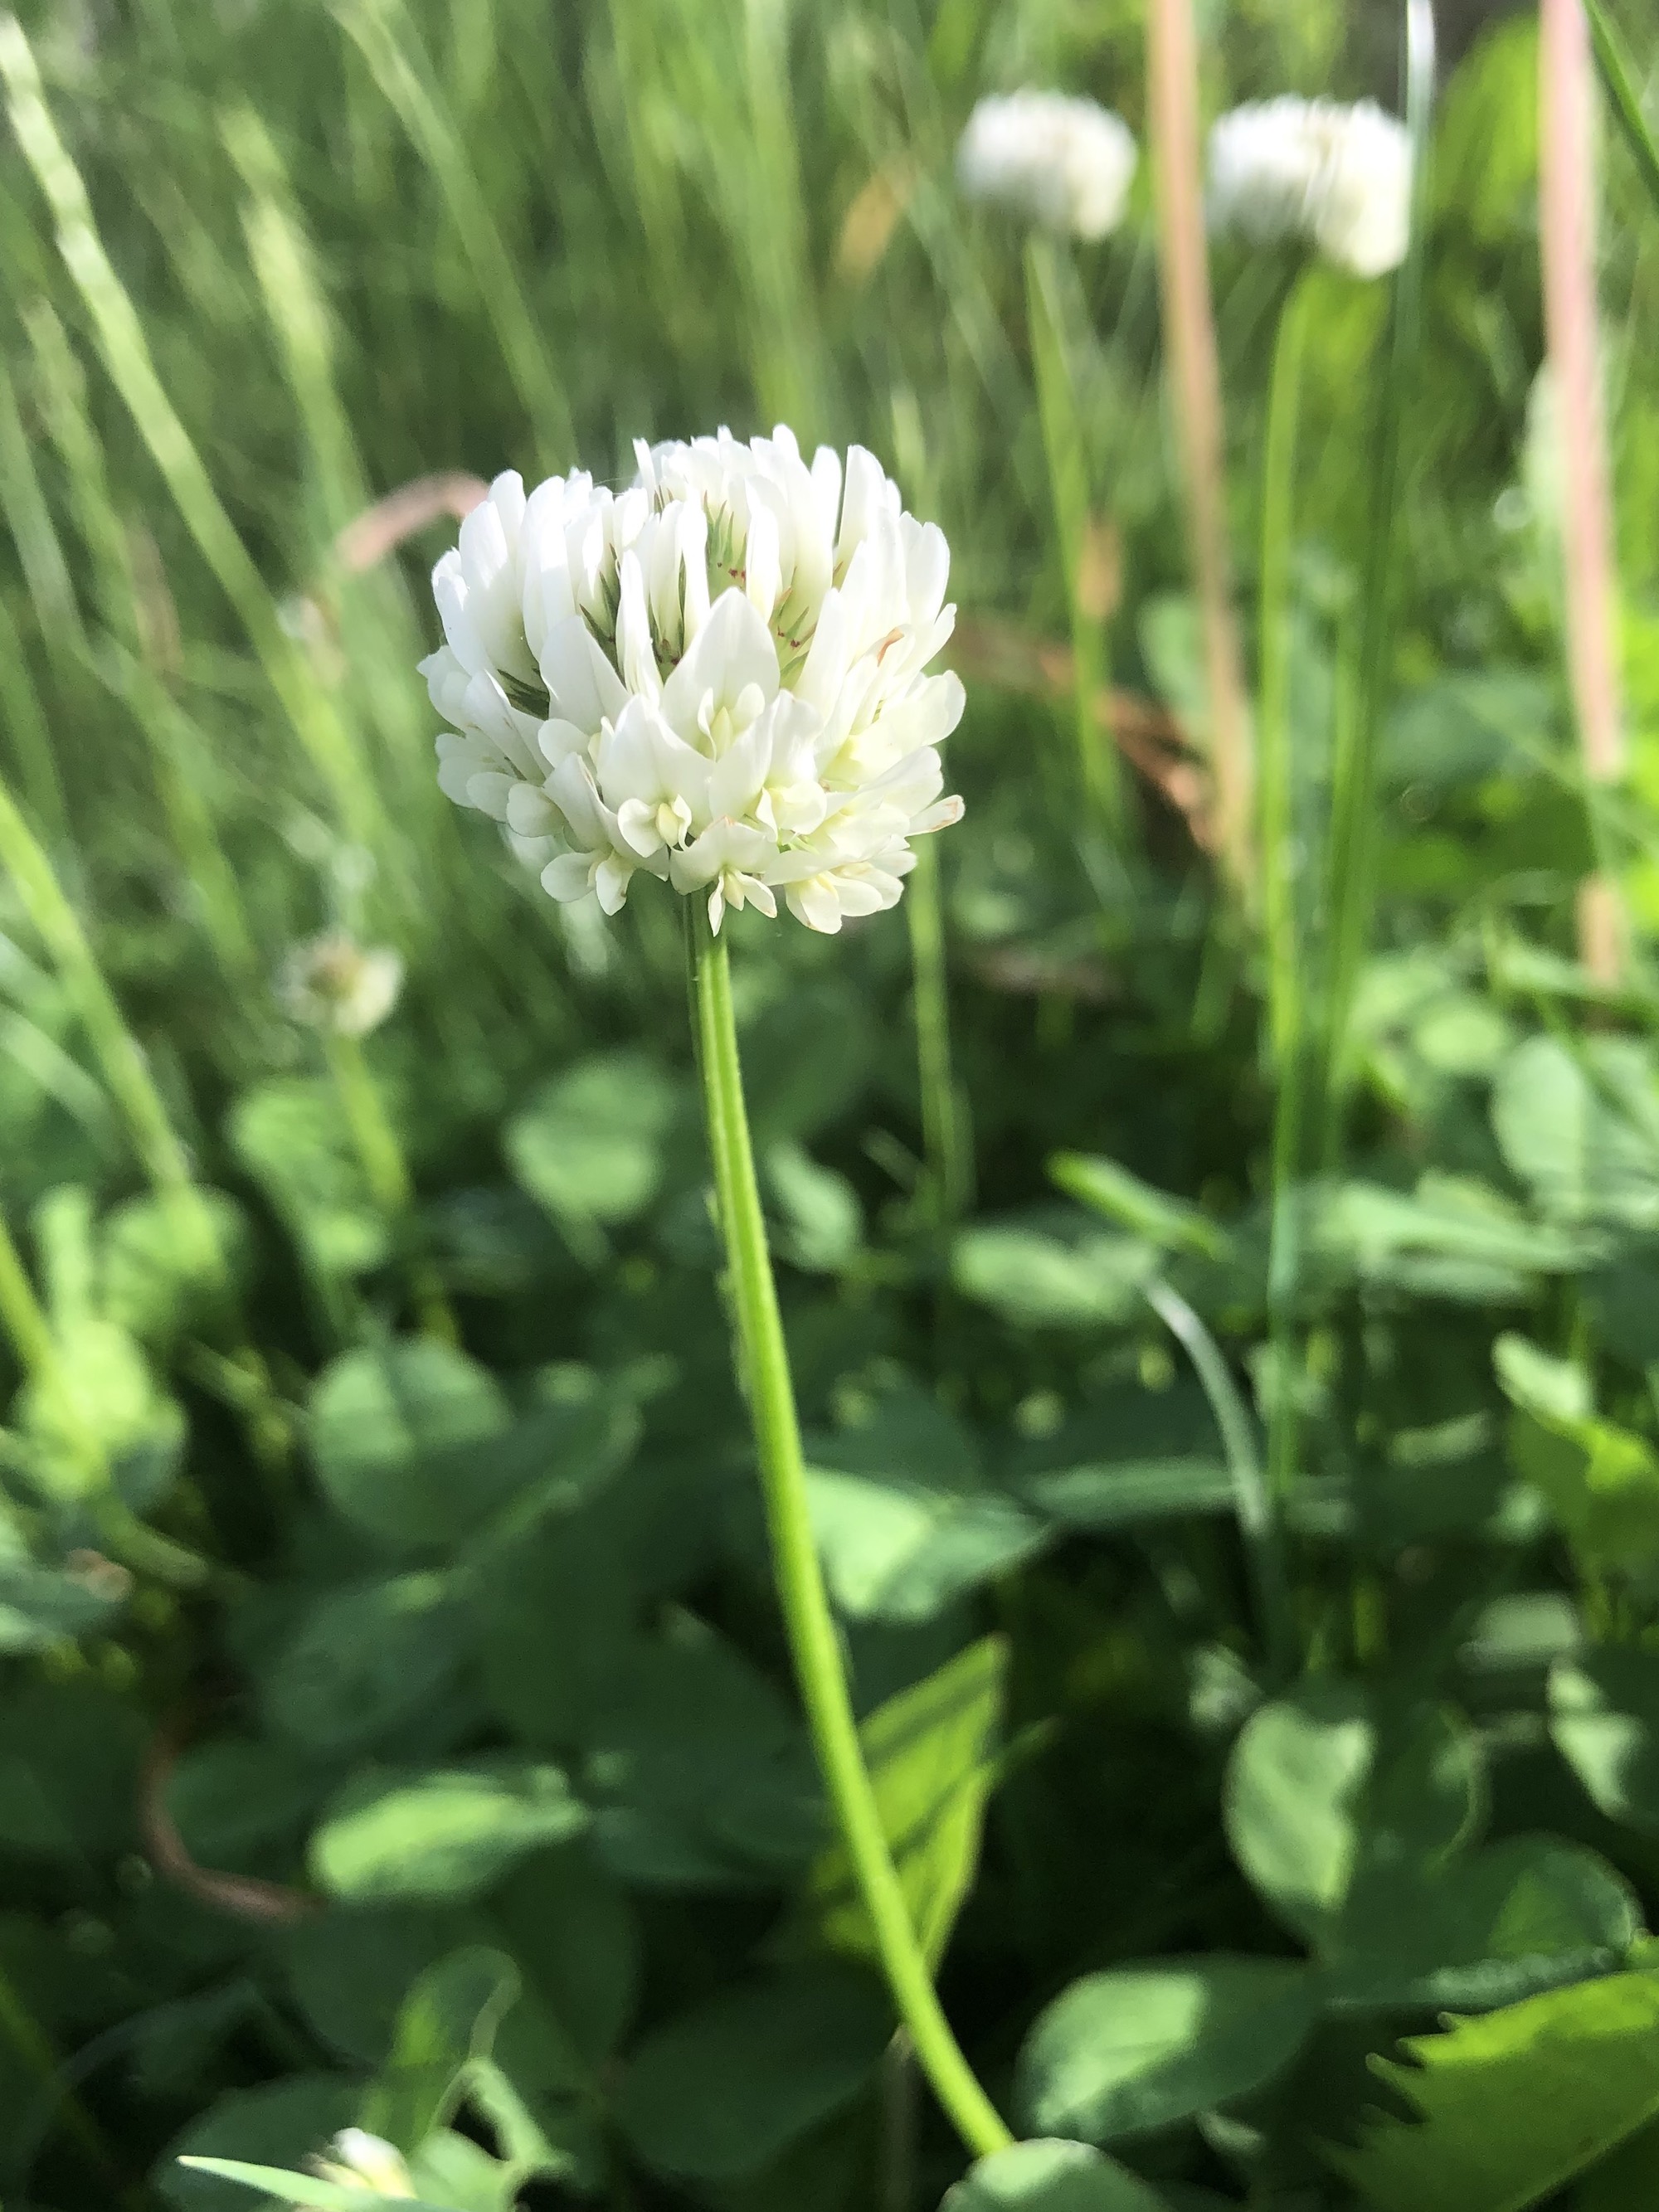 White Clover off of Monroe Street sidewalk in Madison, Wisconsin on May 27, 2020.